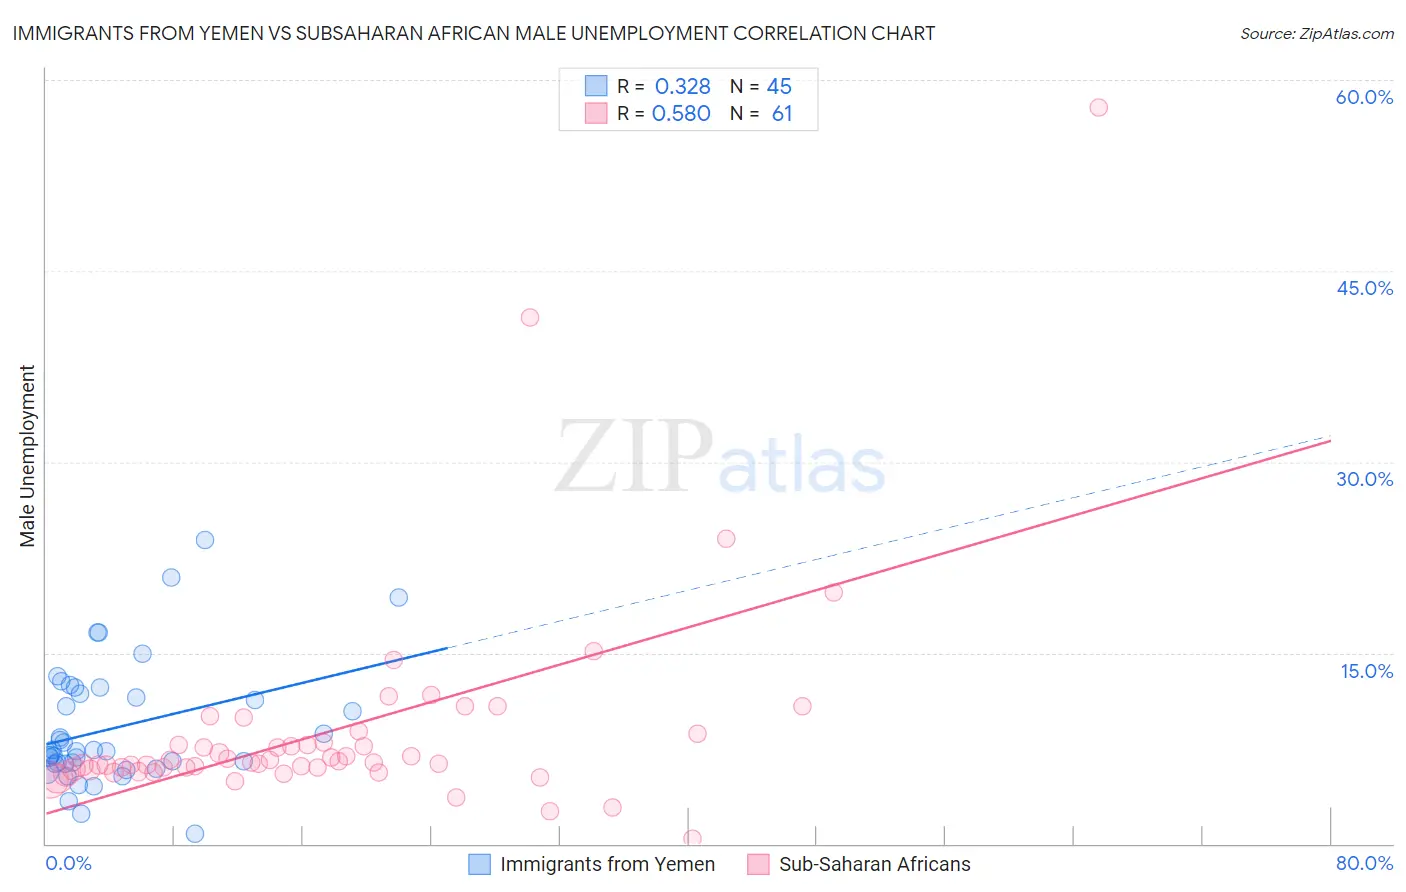 Immigrants from Yemen vs Subsaharan African Male Unemployment